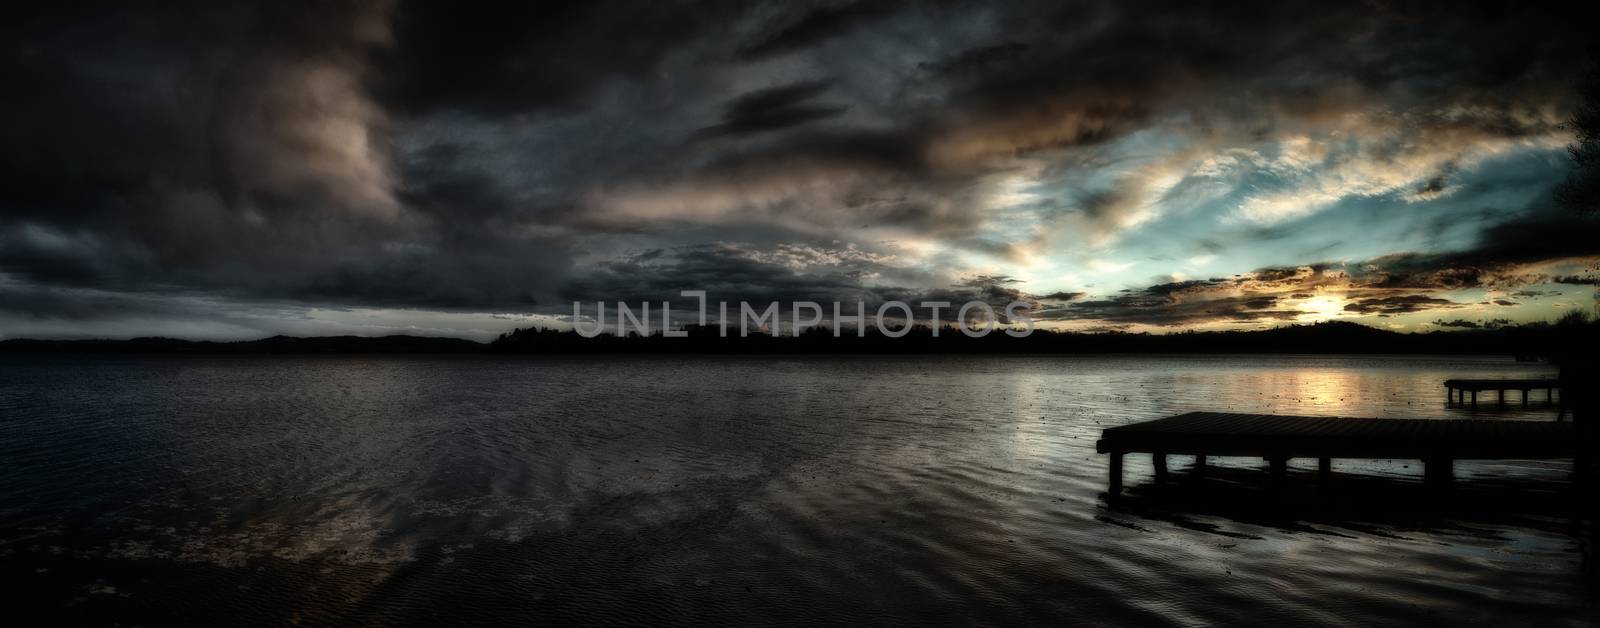 Dark sunset over the lake by Mdc1970